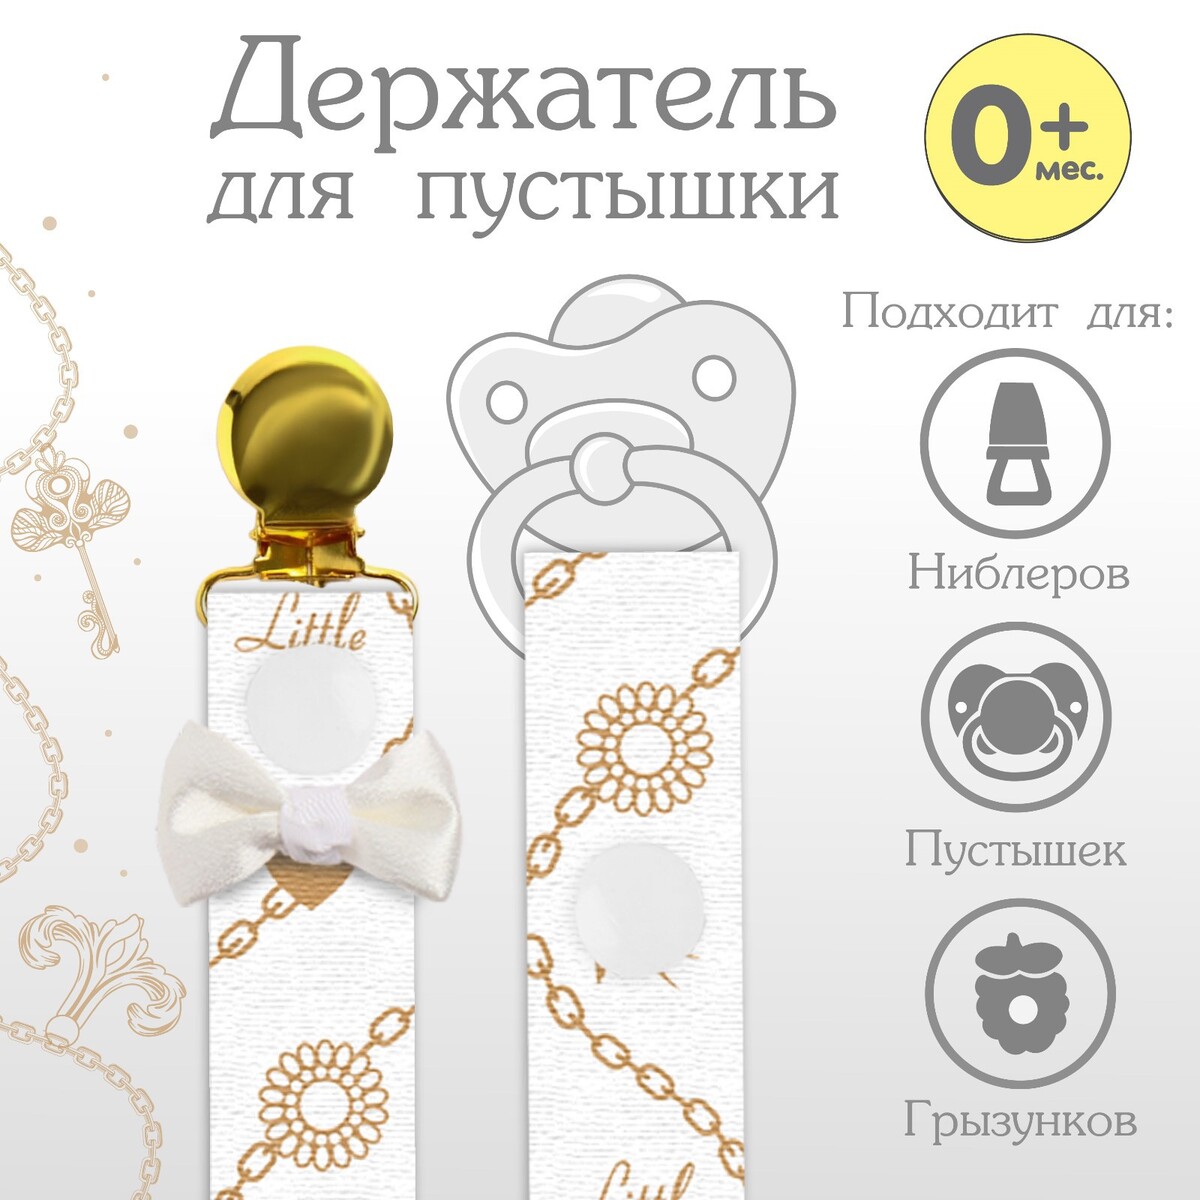 Держатель для соски - пустышки с лентой little lady new resin necklace earrings holder mannequin bust stand model shop jewelry display organizer for young lady s head